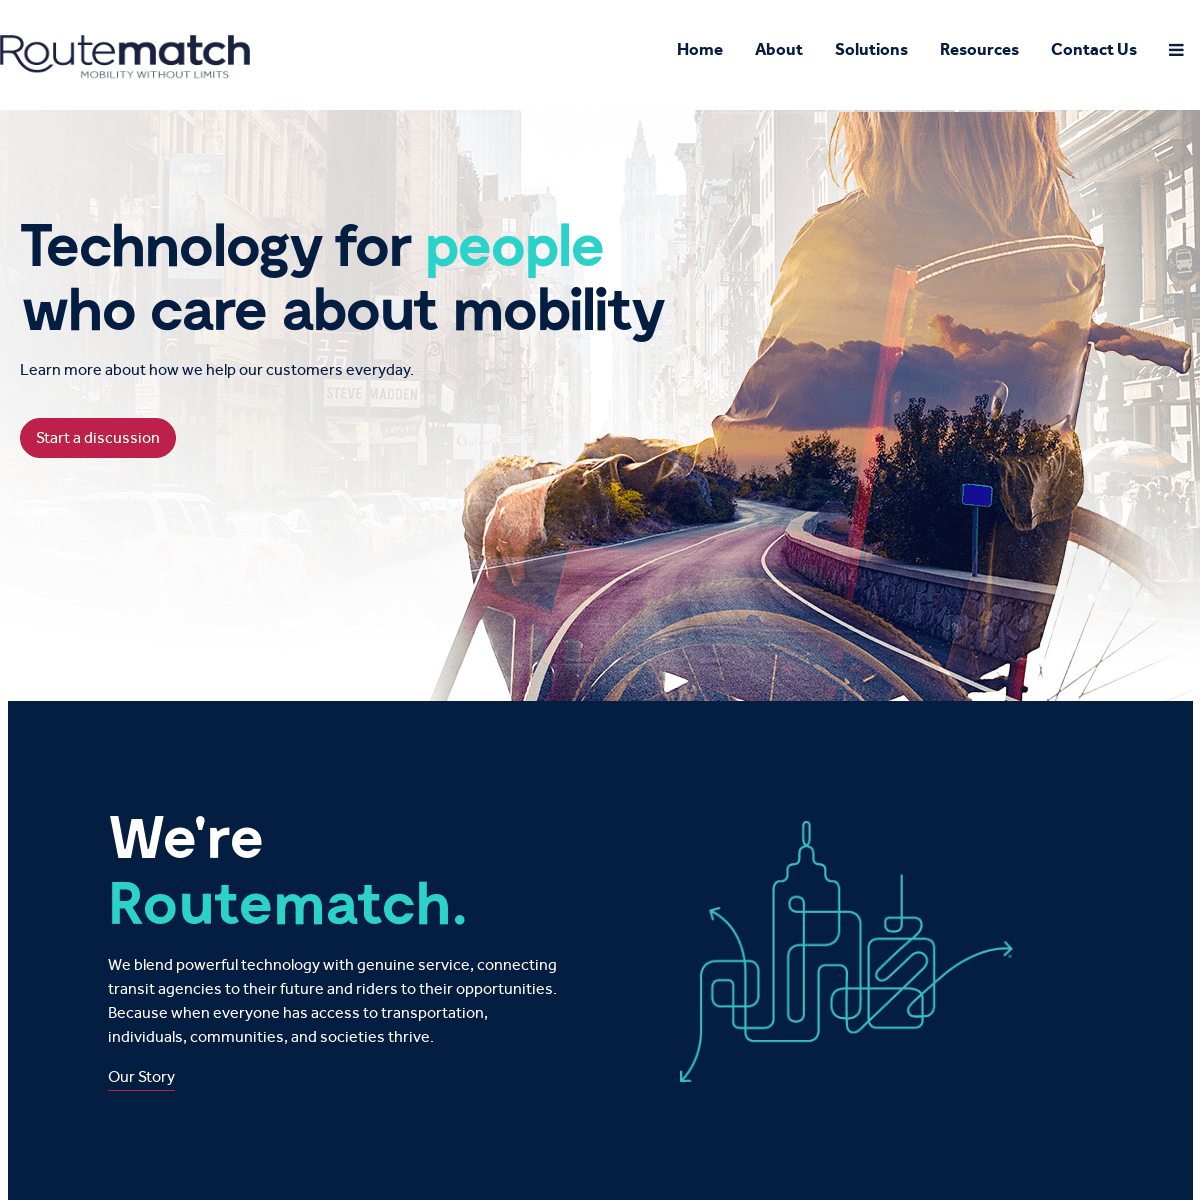 A complete backup of routematch.com